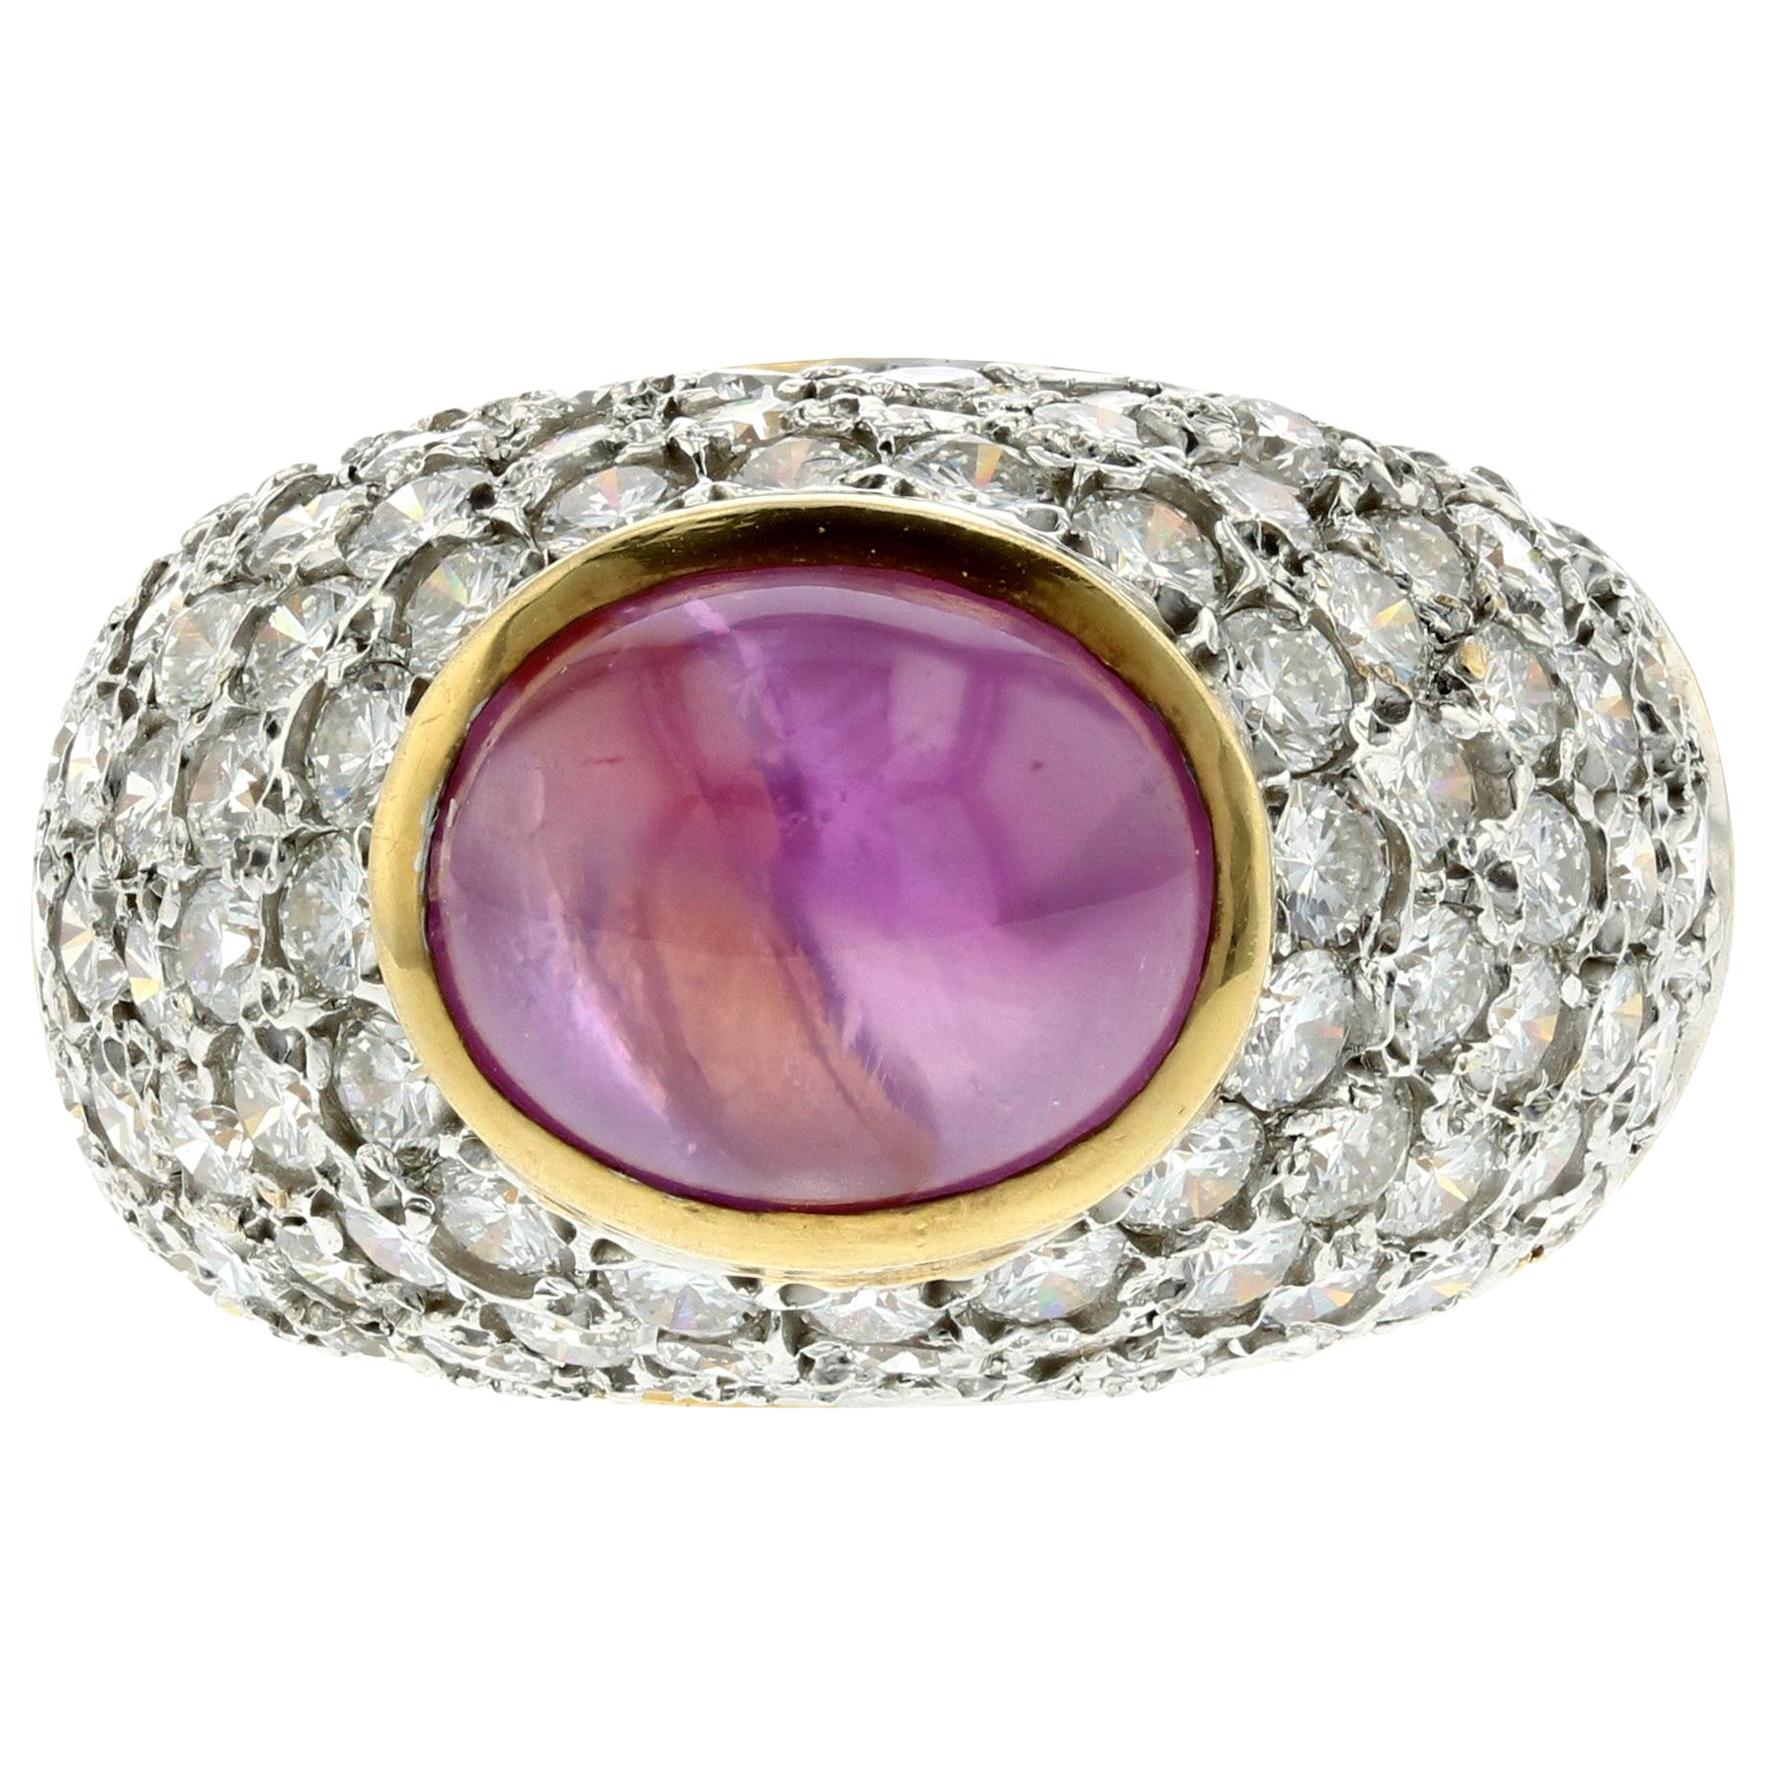 GIA Certified 6.50 Carat Pink Star Sapphire and Pavé Diamond Ring in 18K Gold